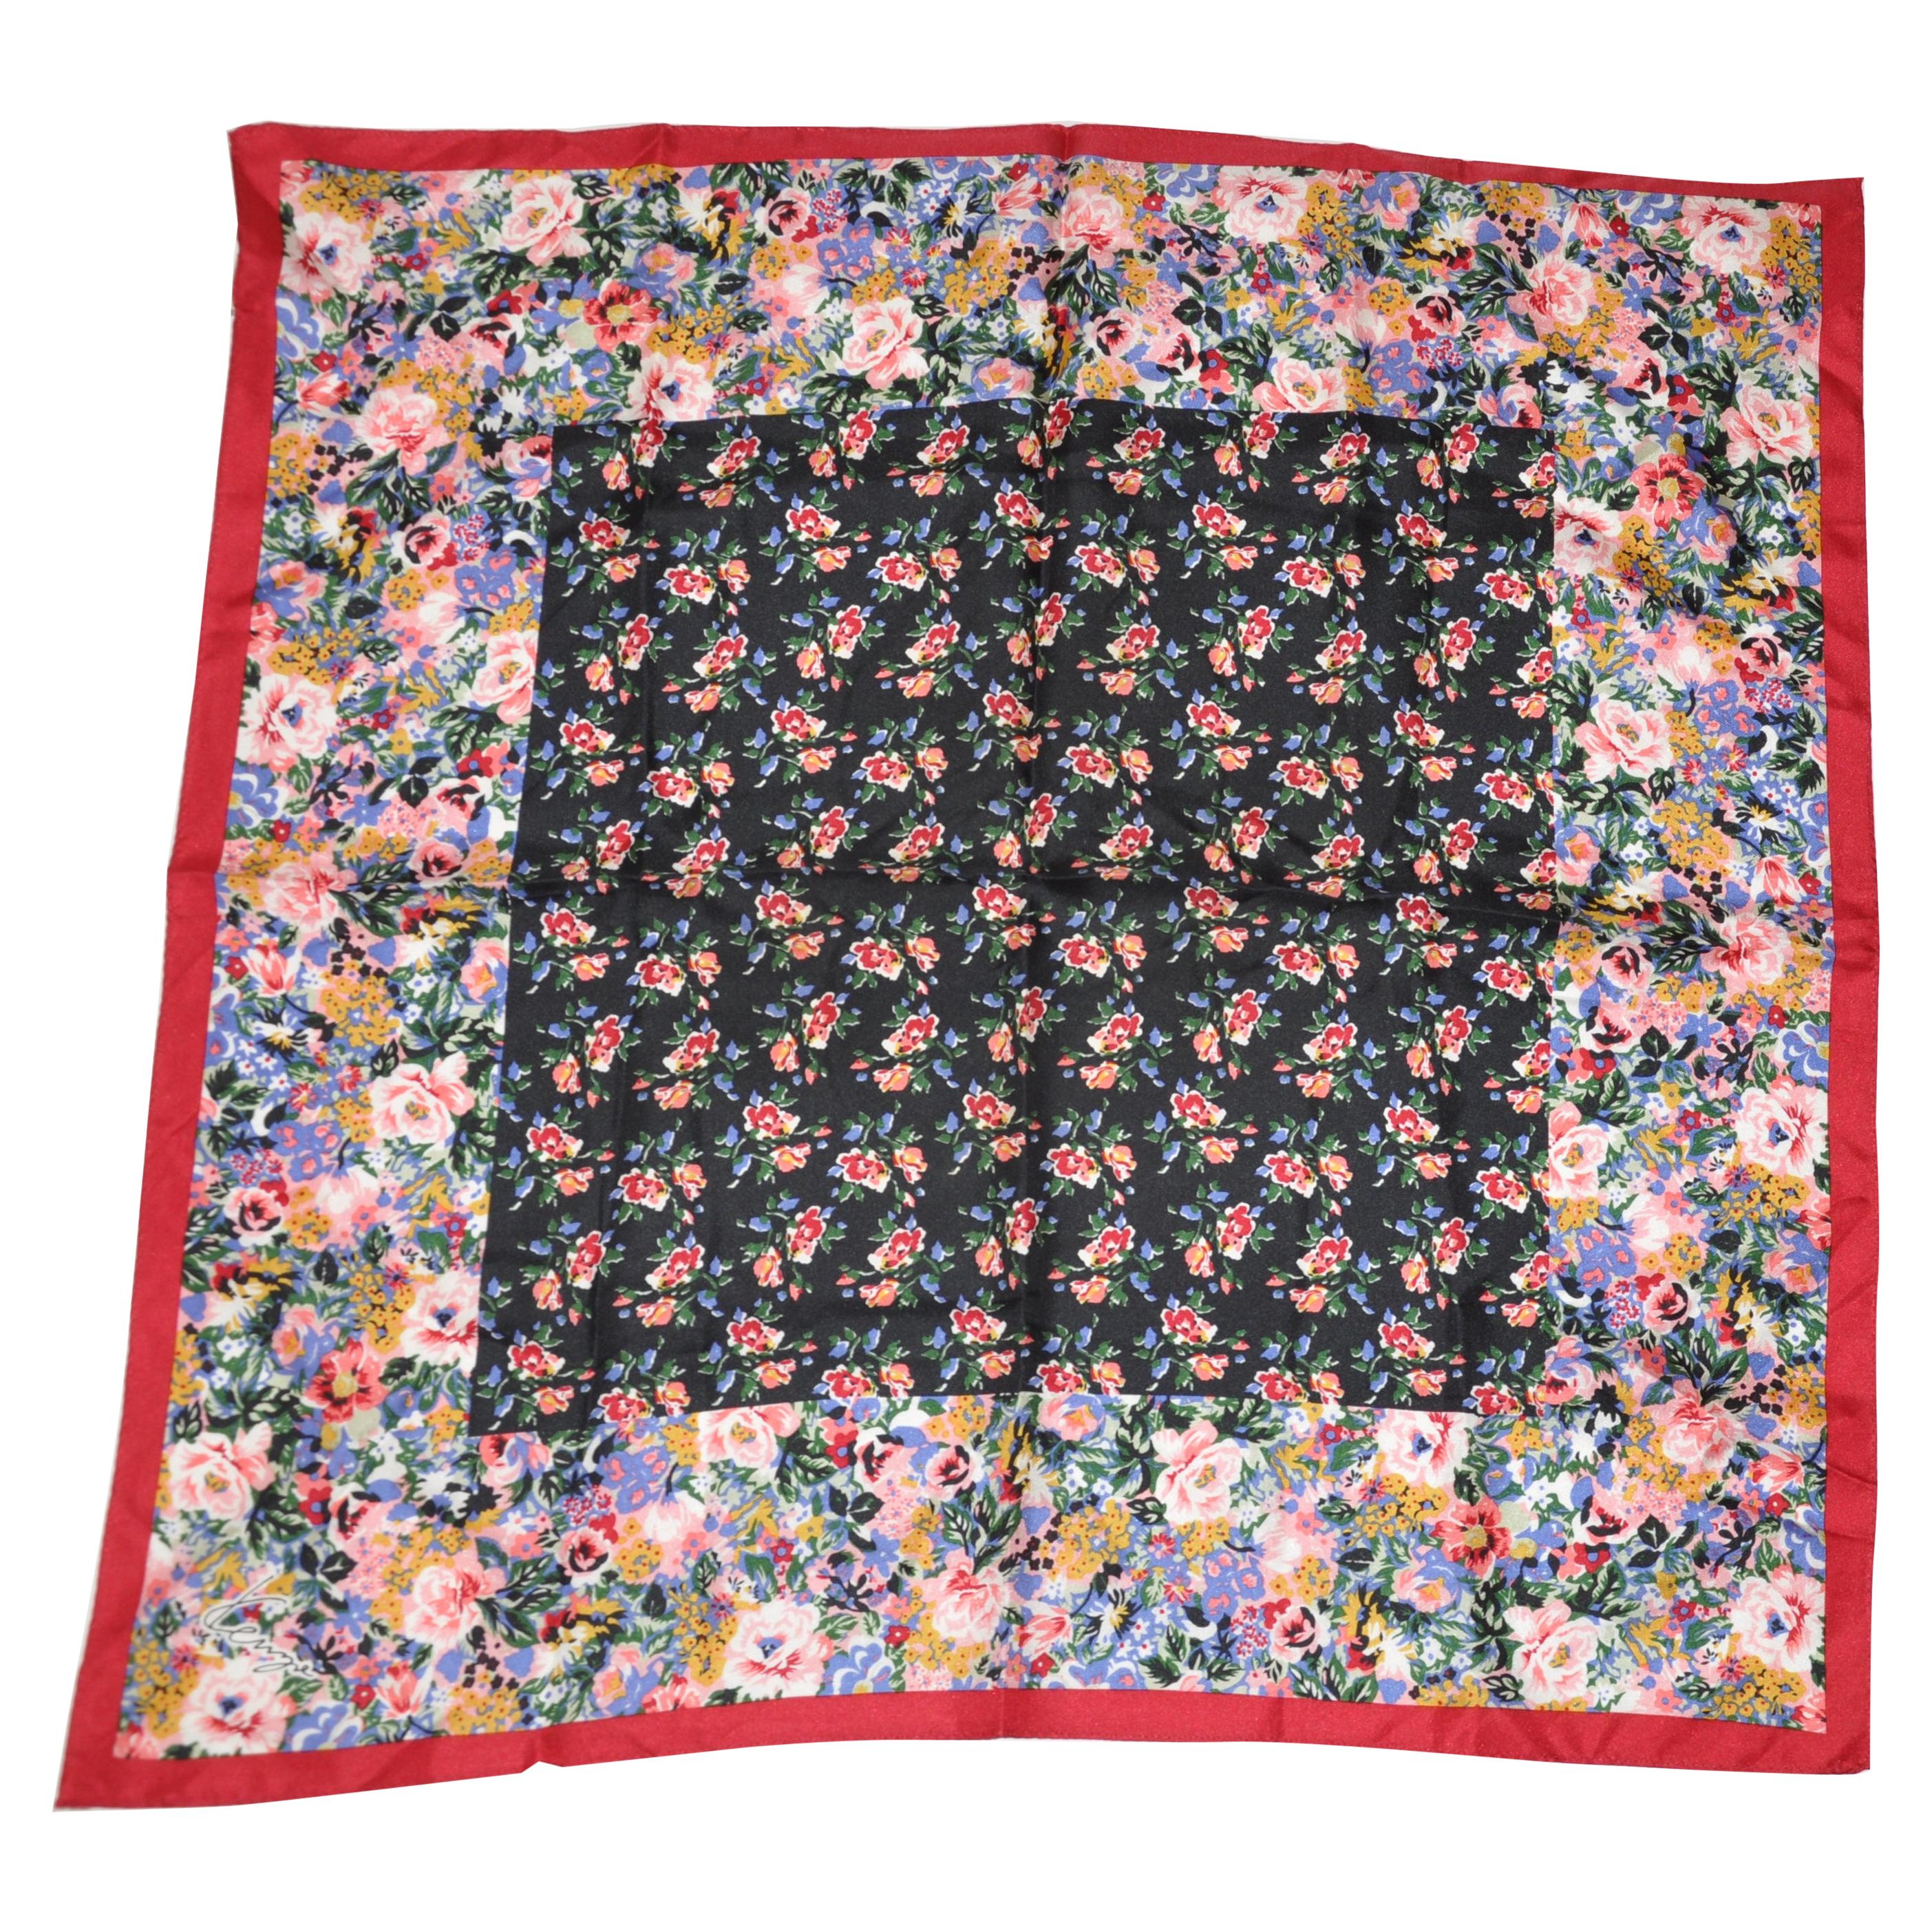 Kenzo's Burgundy-Borders With Multi-Colors of "Floral Blooms" Silk Scarf